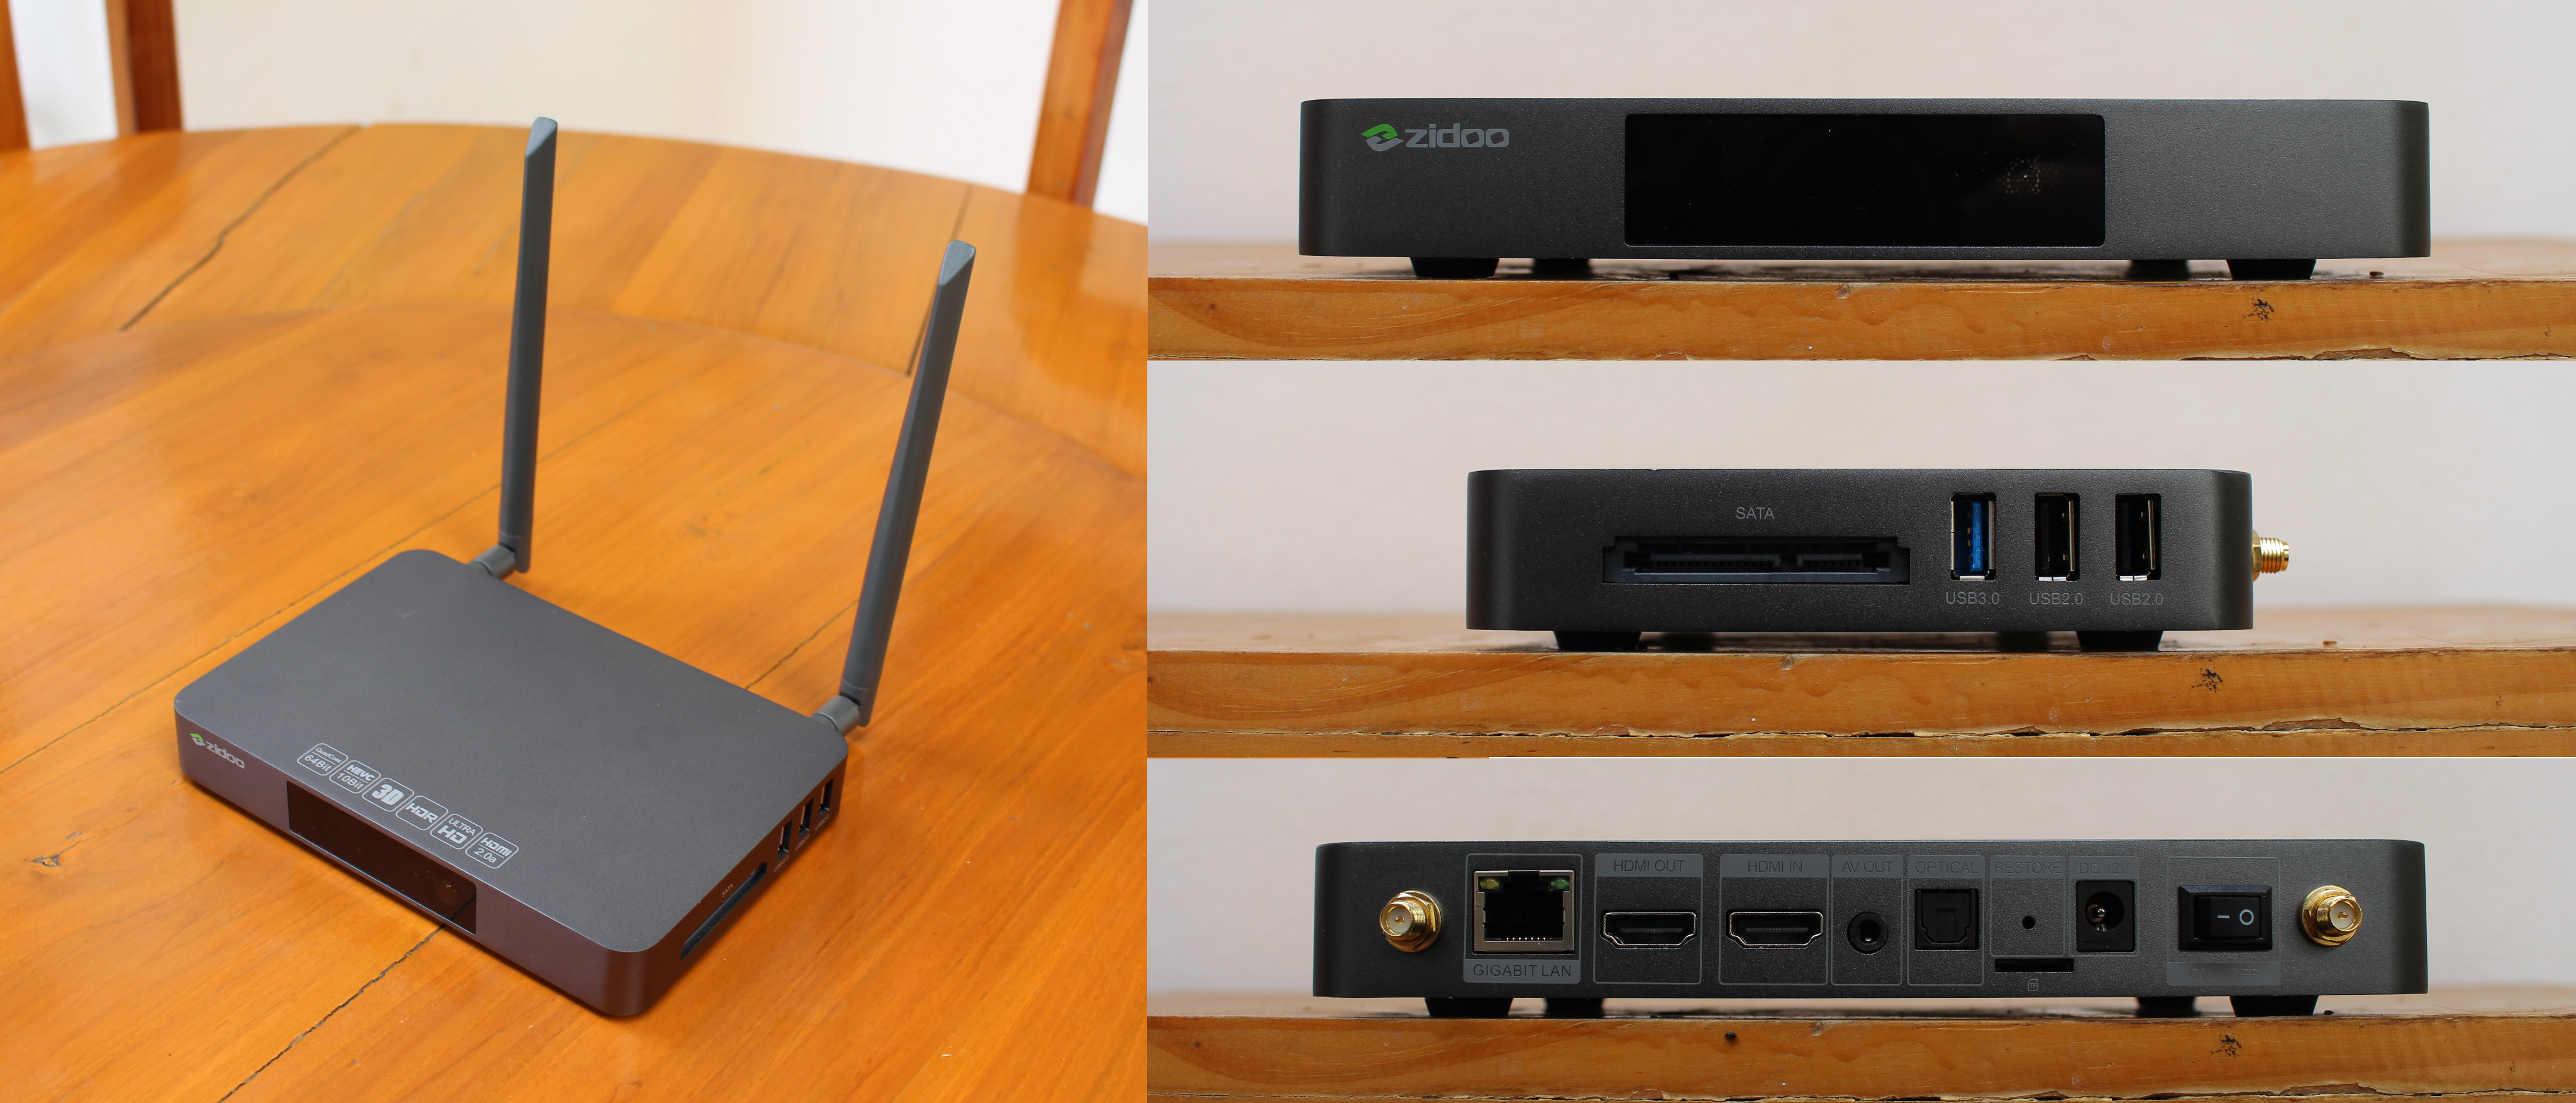 Zidoo X9S (Realtek RTD1295) Android TV Box Review – Part 1: Unboxing ...